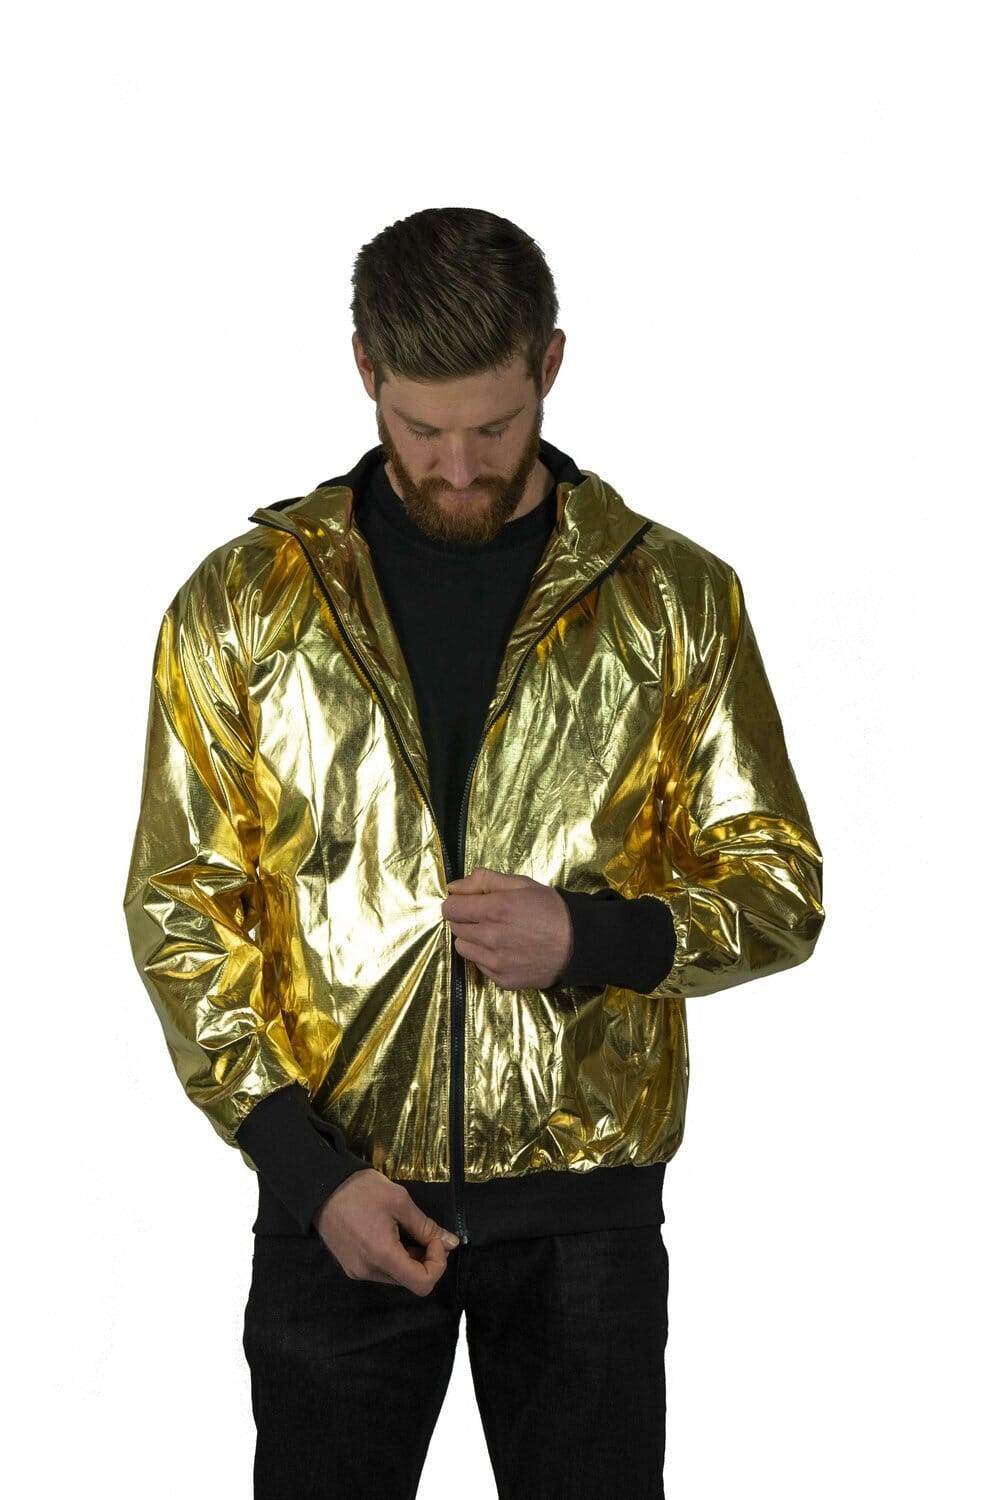 Mens black and Gold Bomber Jacket from Love Khaos streetwear brand